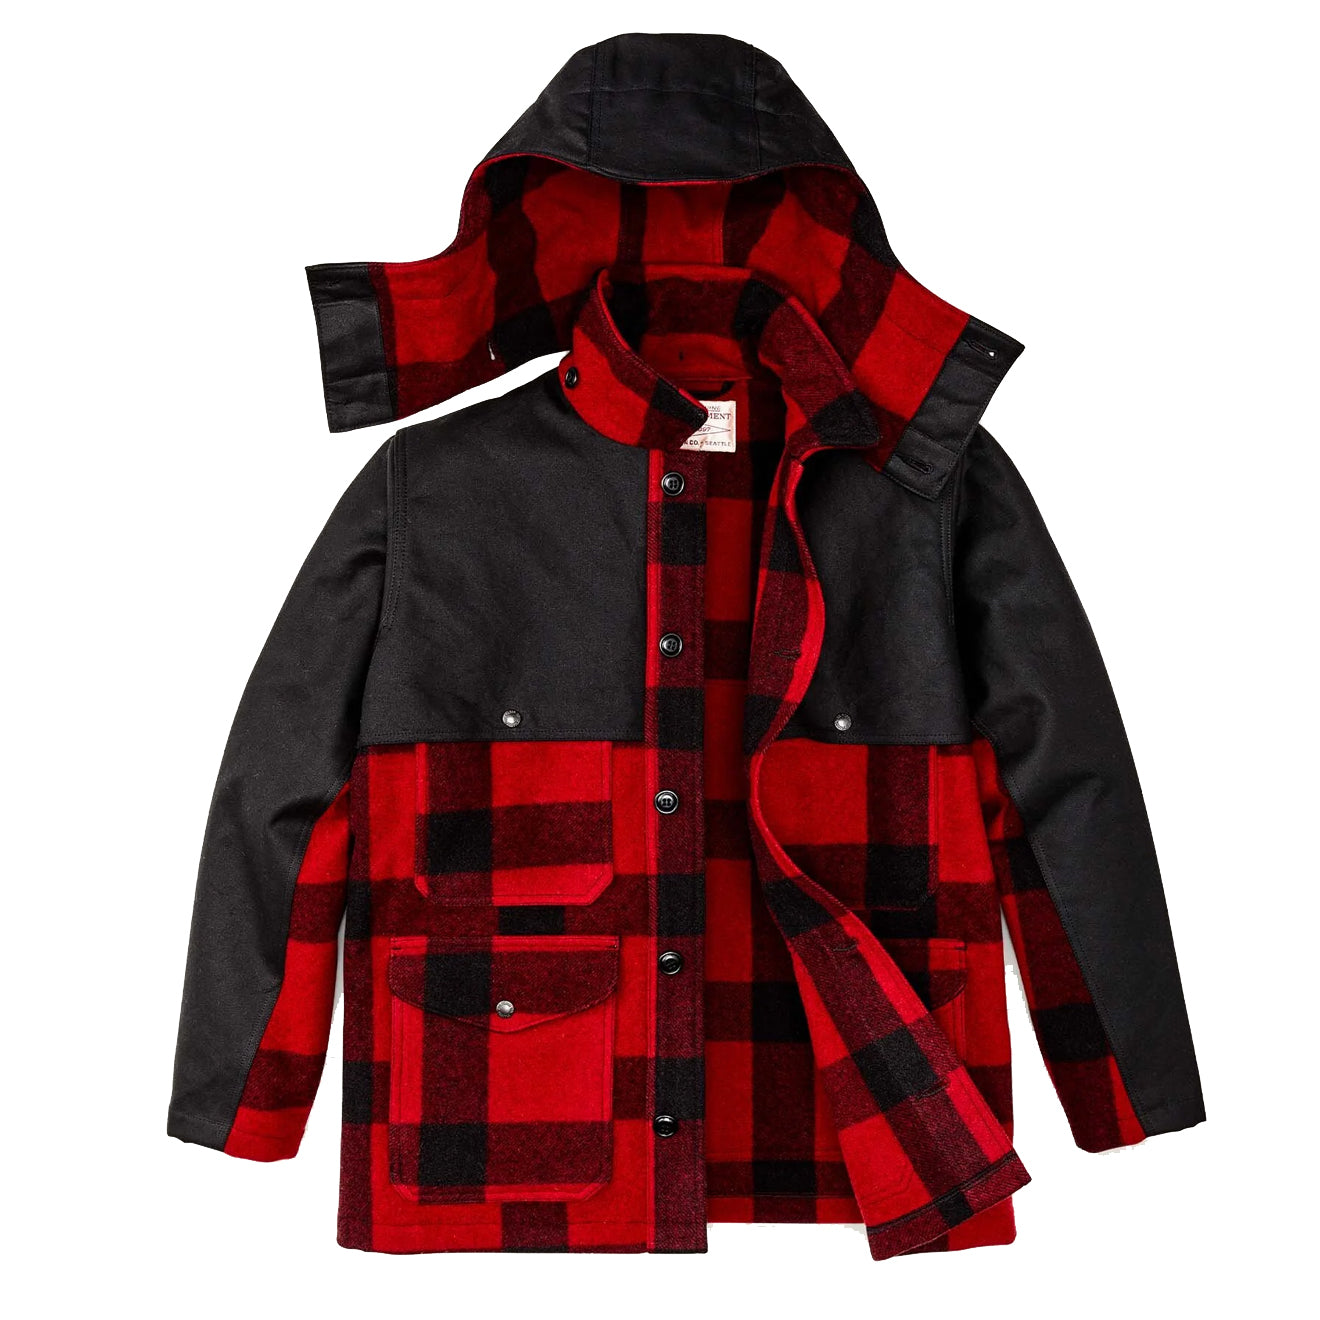 Filson Mackinaw Wool Double Coat Red Black Classic Plaid | The Sporting ...